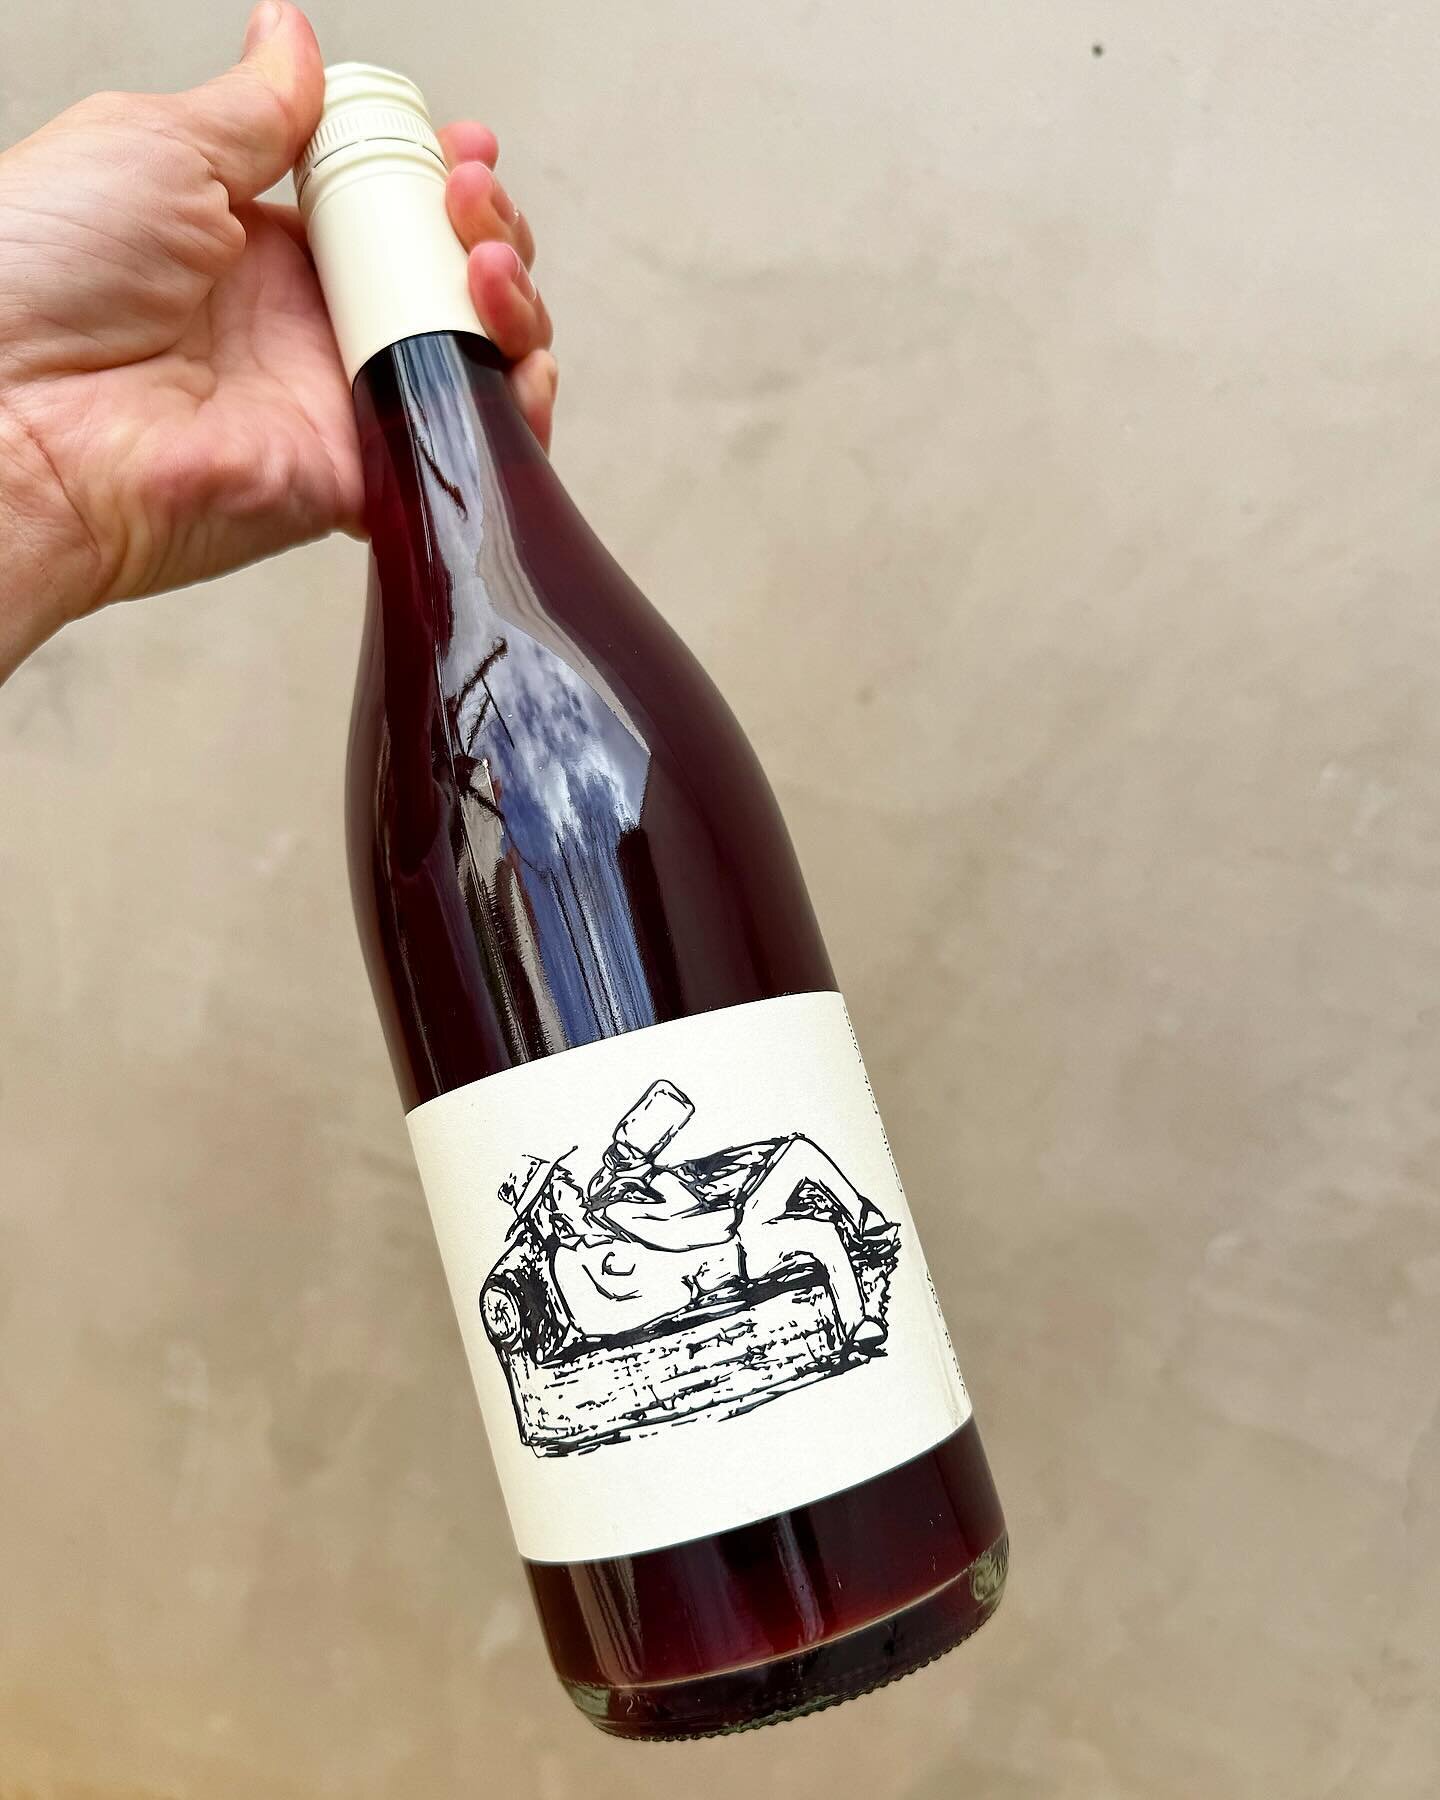 🔔 Australian Chilled Red Blend 🔔 
By @gentlefolkwine 
Spicy &bull; Punchy &bull; Currant &bull; Ripe Fruit 
Now pouring 🌙 
&bull;
Notes by the winemaker : 
The light red delicious lip smacking spicy vibrant little number is back and ready to go!

